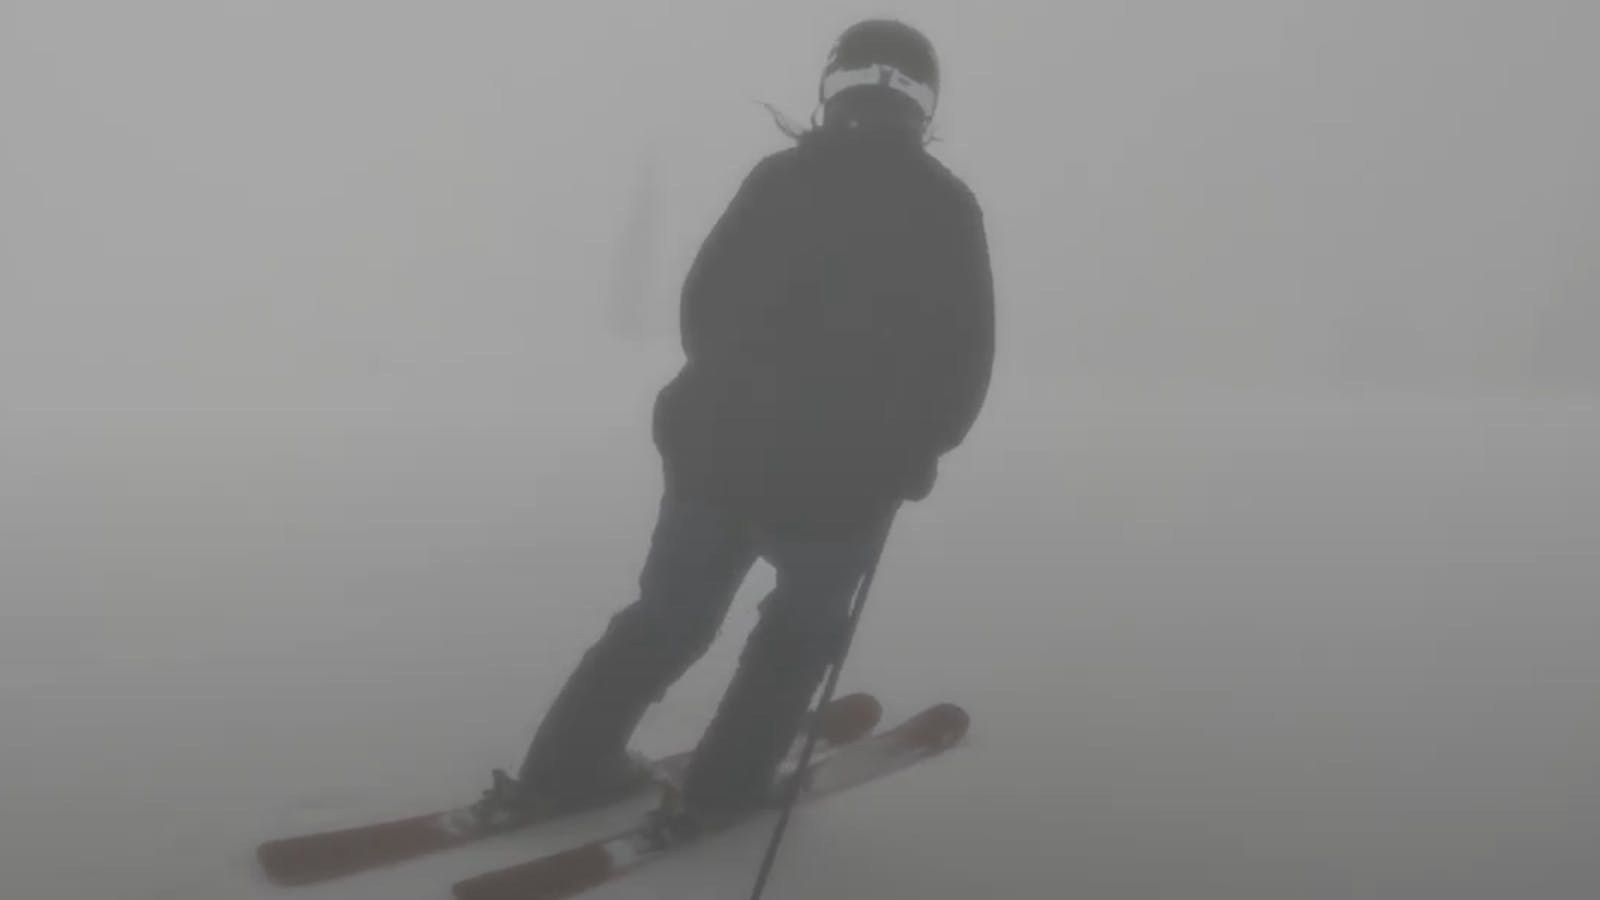 A skier carving down a mountain. 